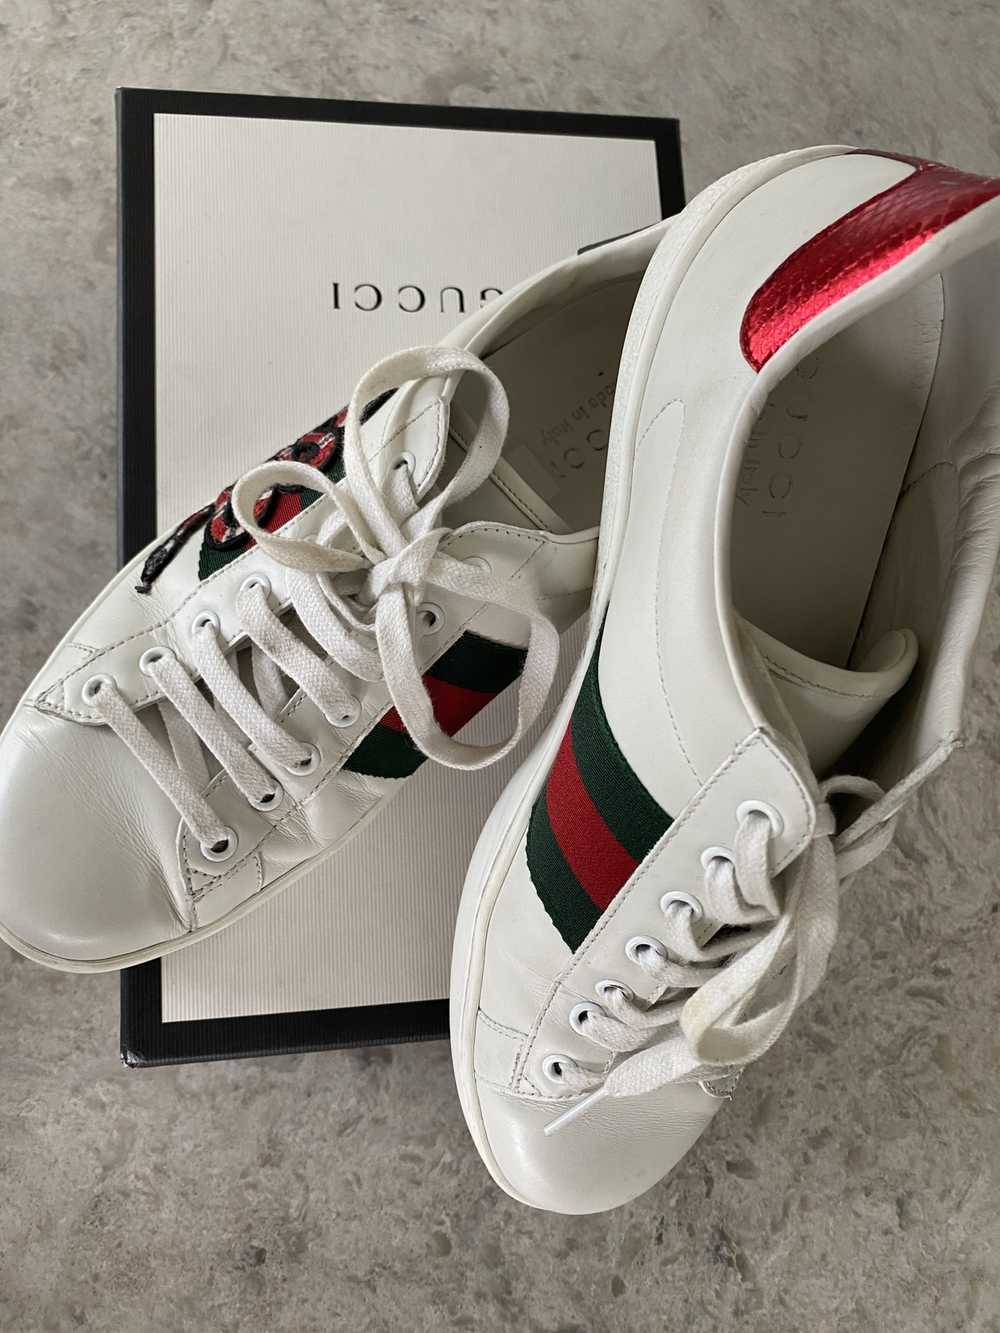 Gucci Ace Snake Sneakers - image 7